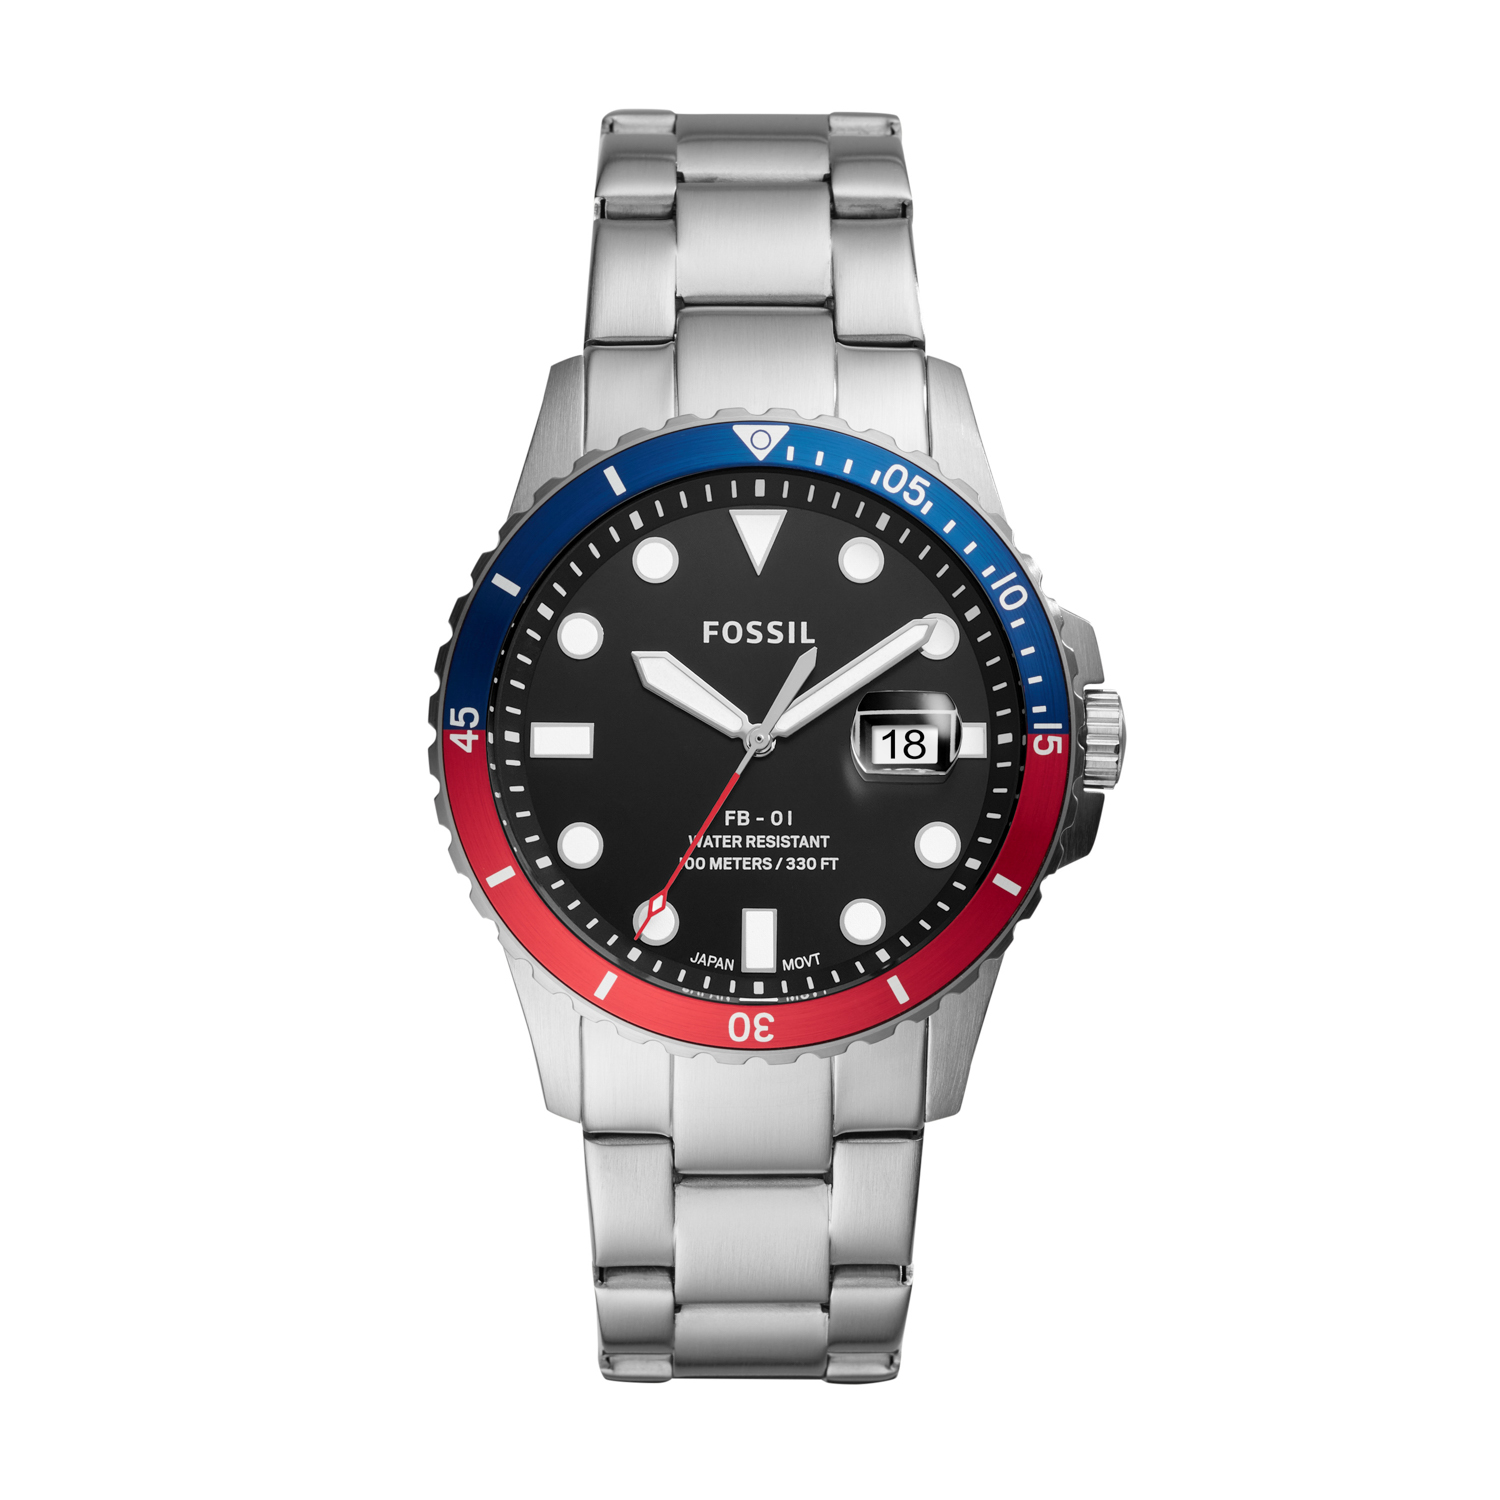 Fossil FB-01 Three-Hand Watch - Red & Blue